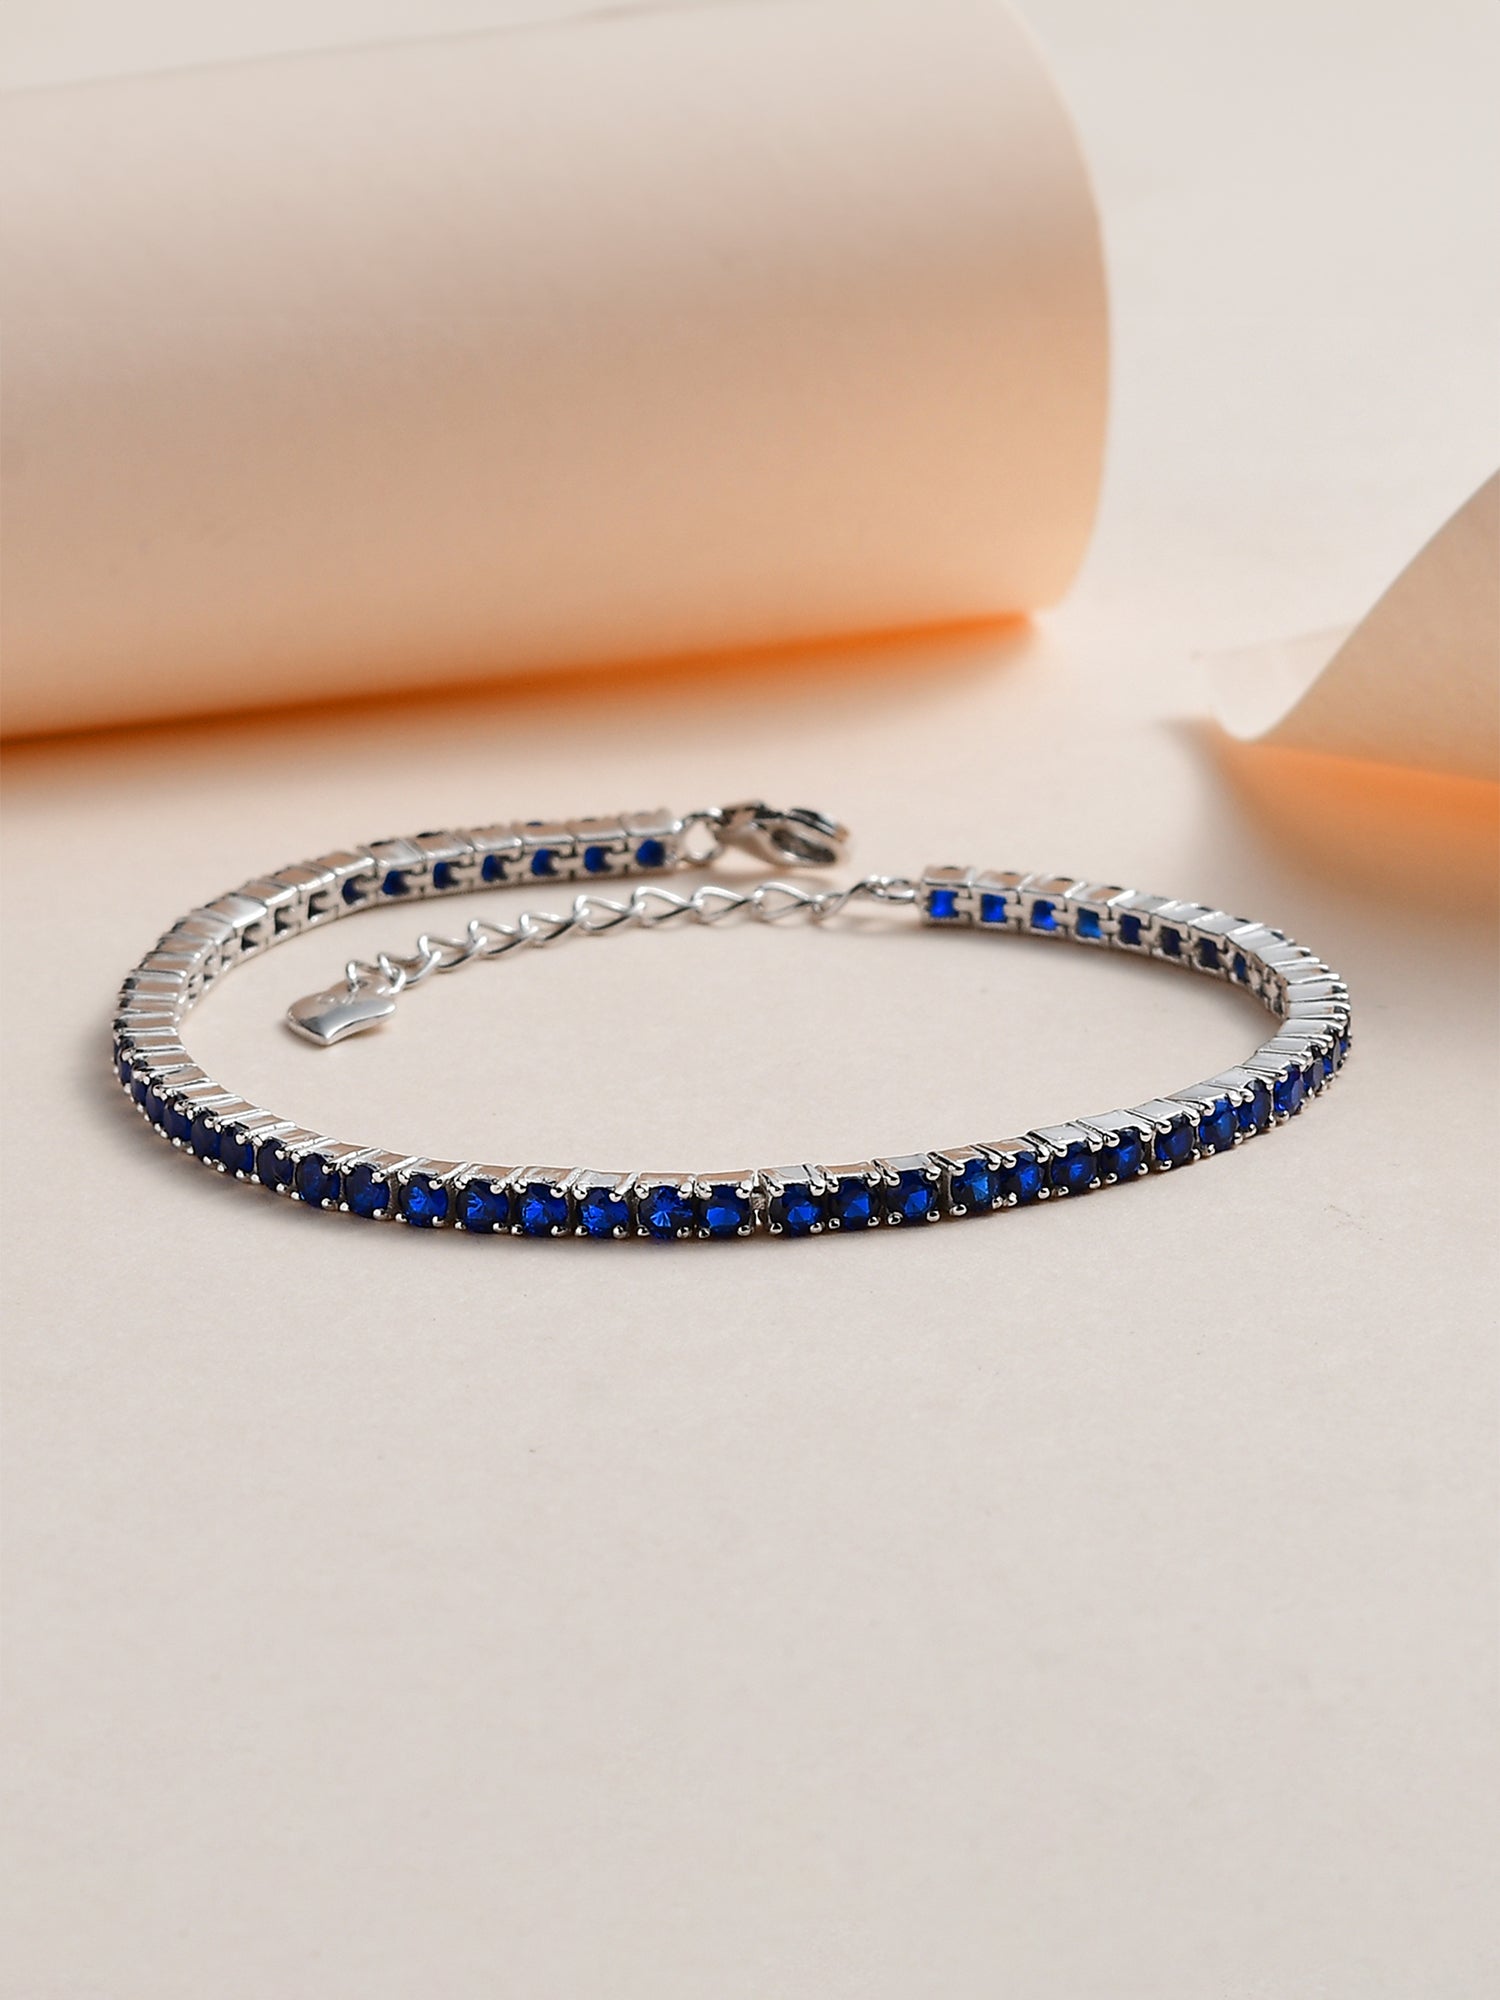 Blue Sapphire Tennis Bracelet Made With 925 Sterling Silver